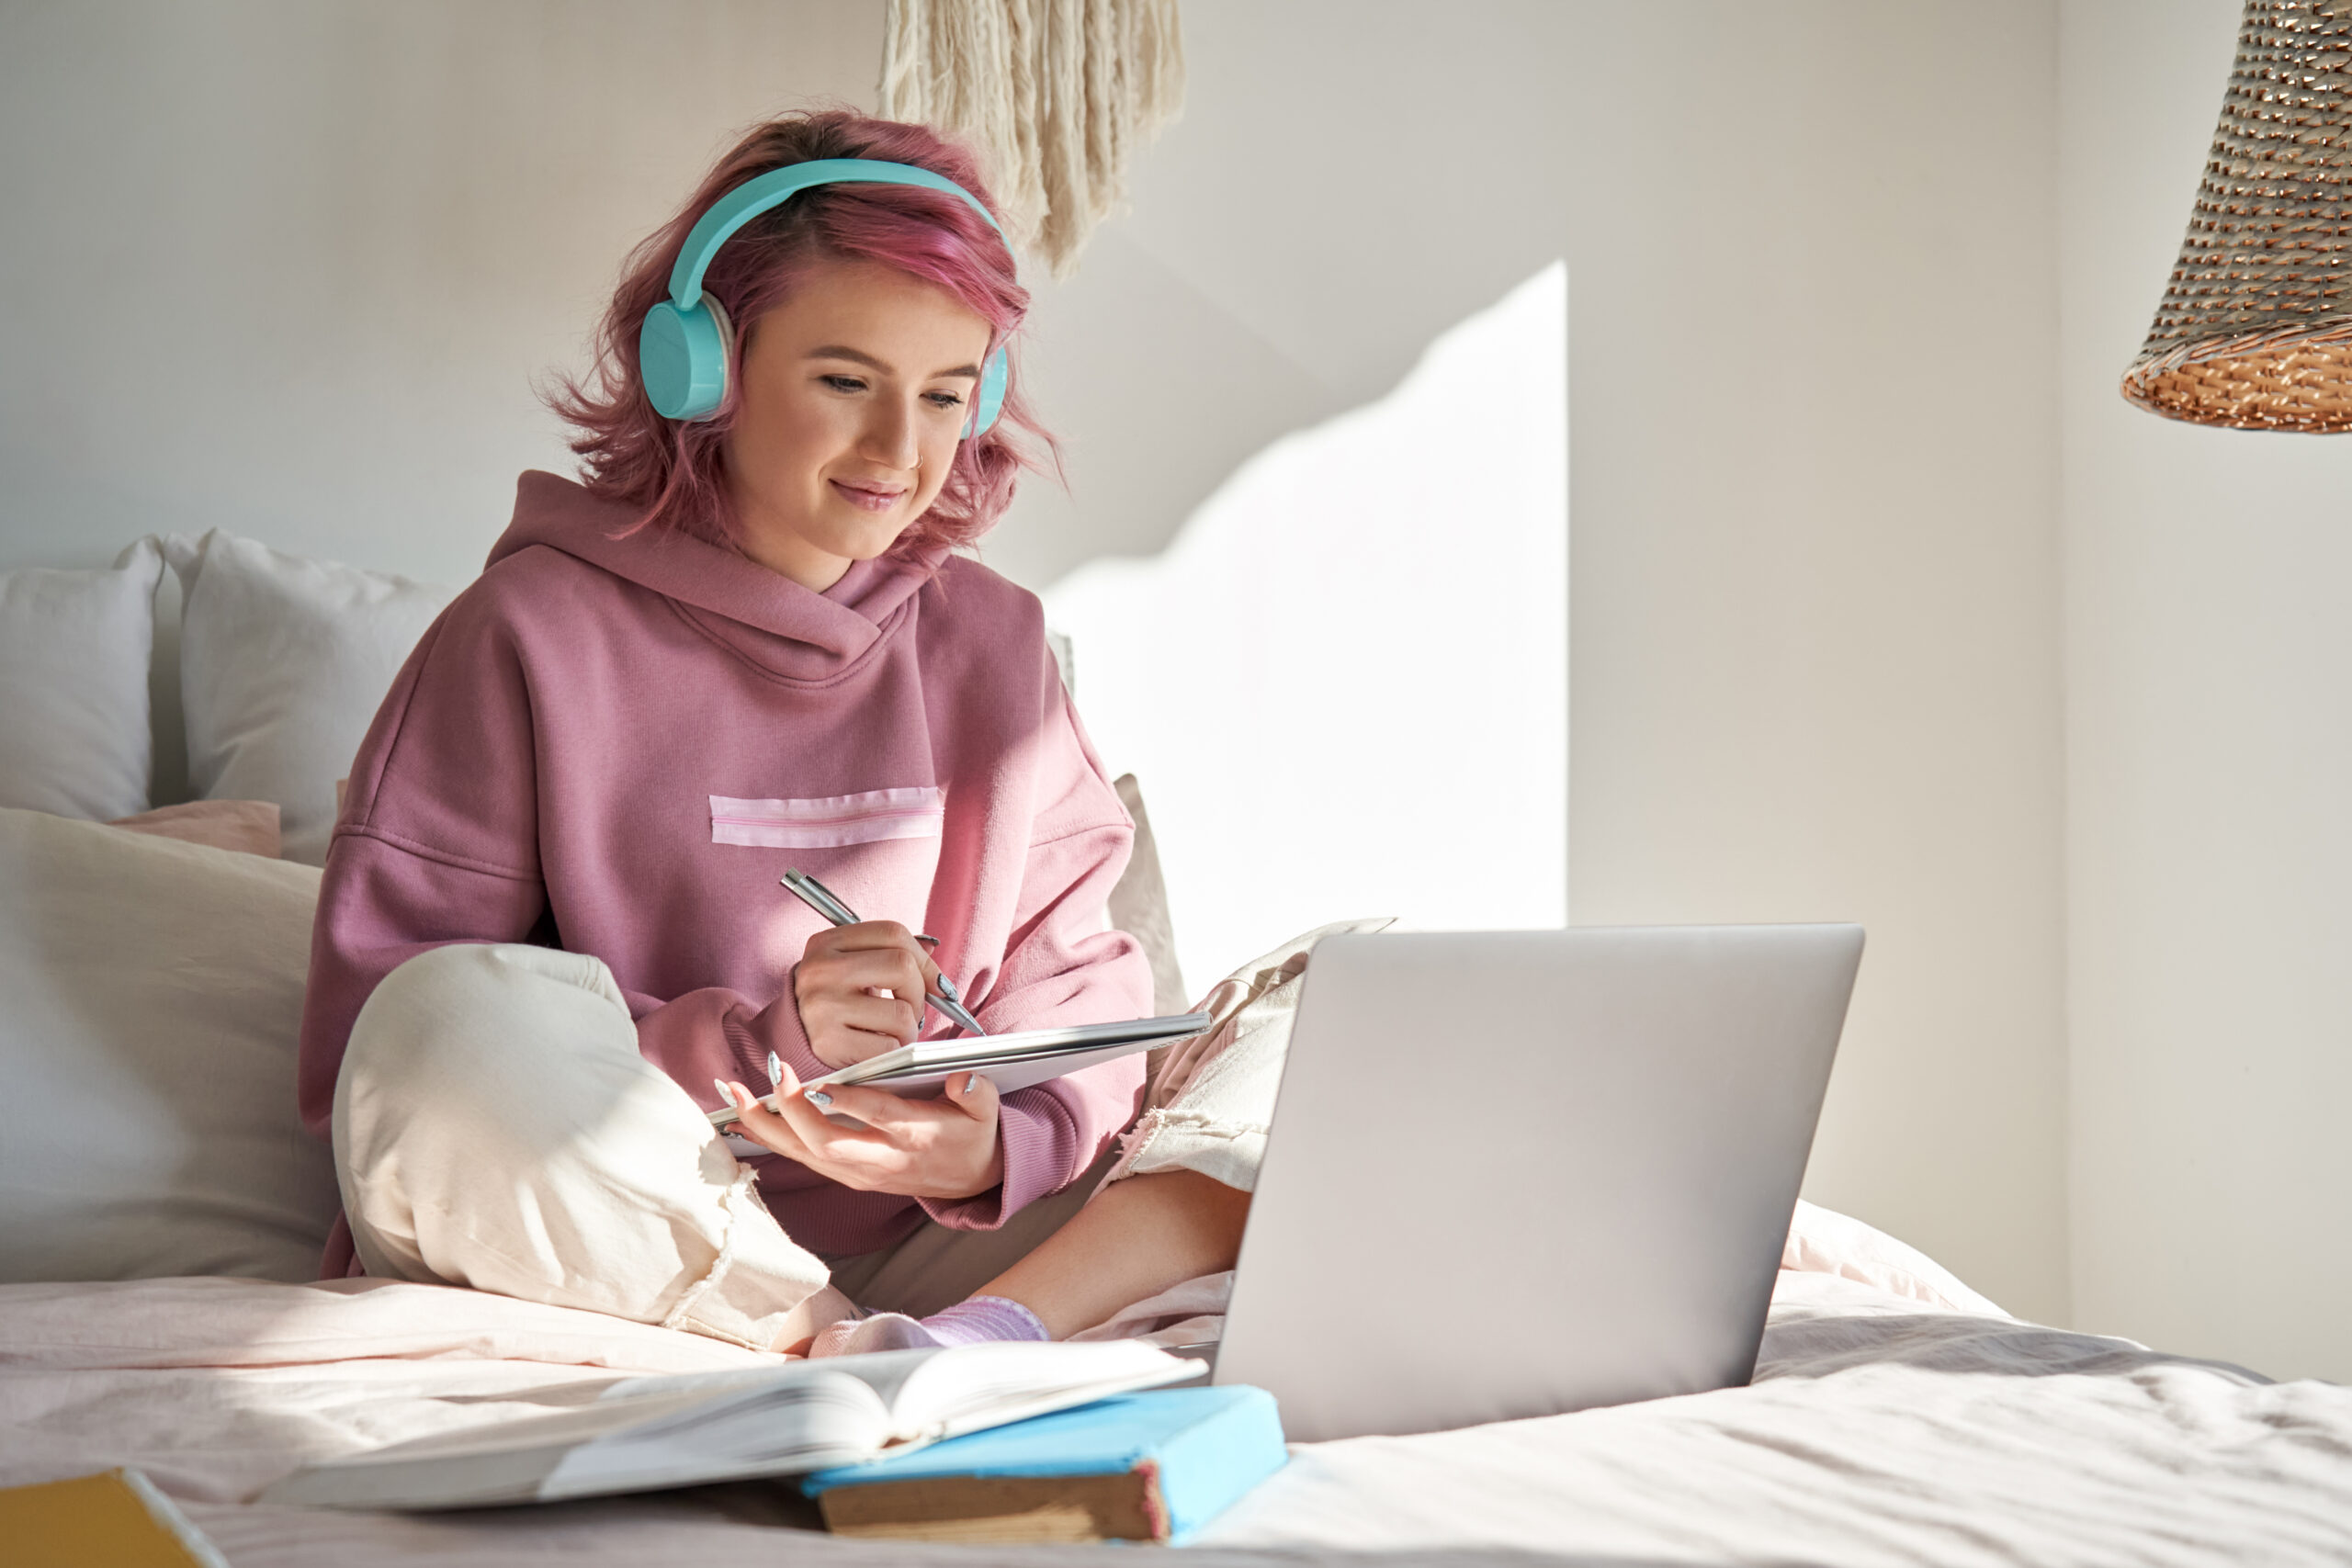 Hipster young woman sitting on her bed with headphones, taking notes on a notepad while looking at a computer